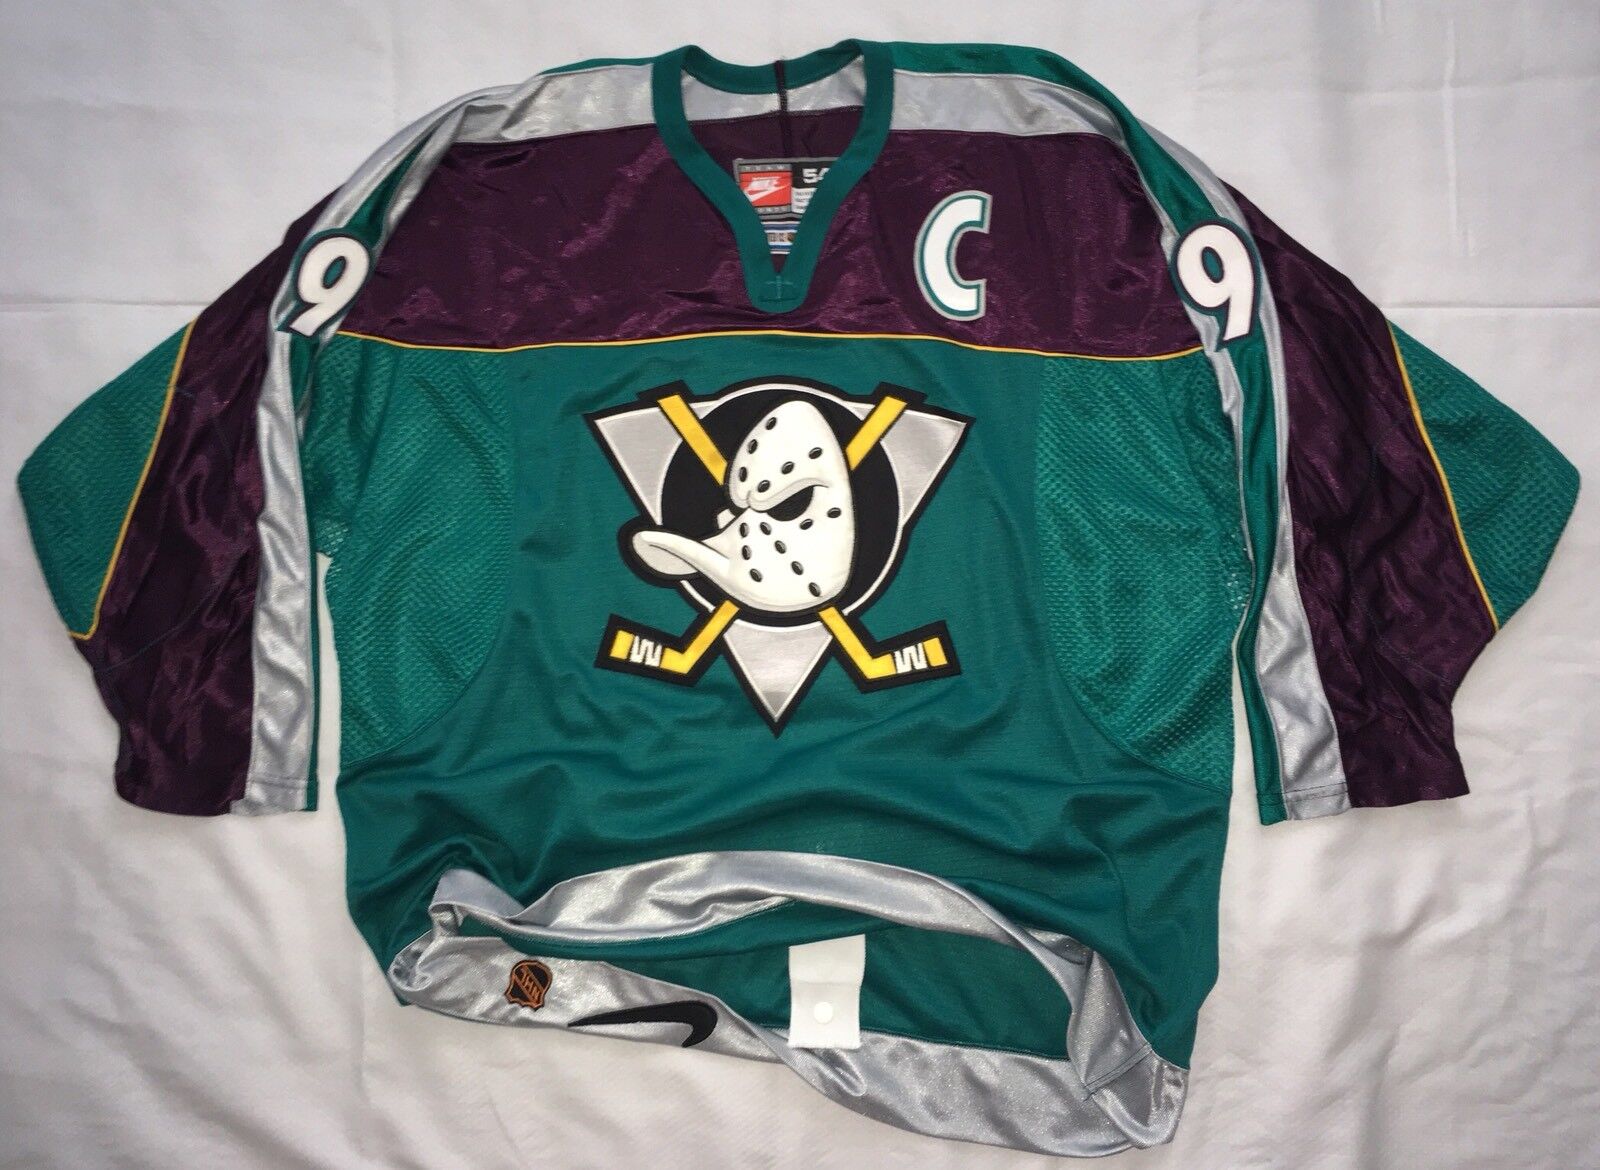 NFS/NFT: Took years of searching and 5.5 months to get back from EPS, but  finally own the 2 jerseys that were must haves for the collection. Paul  Kariya Mighty Ducks Home and